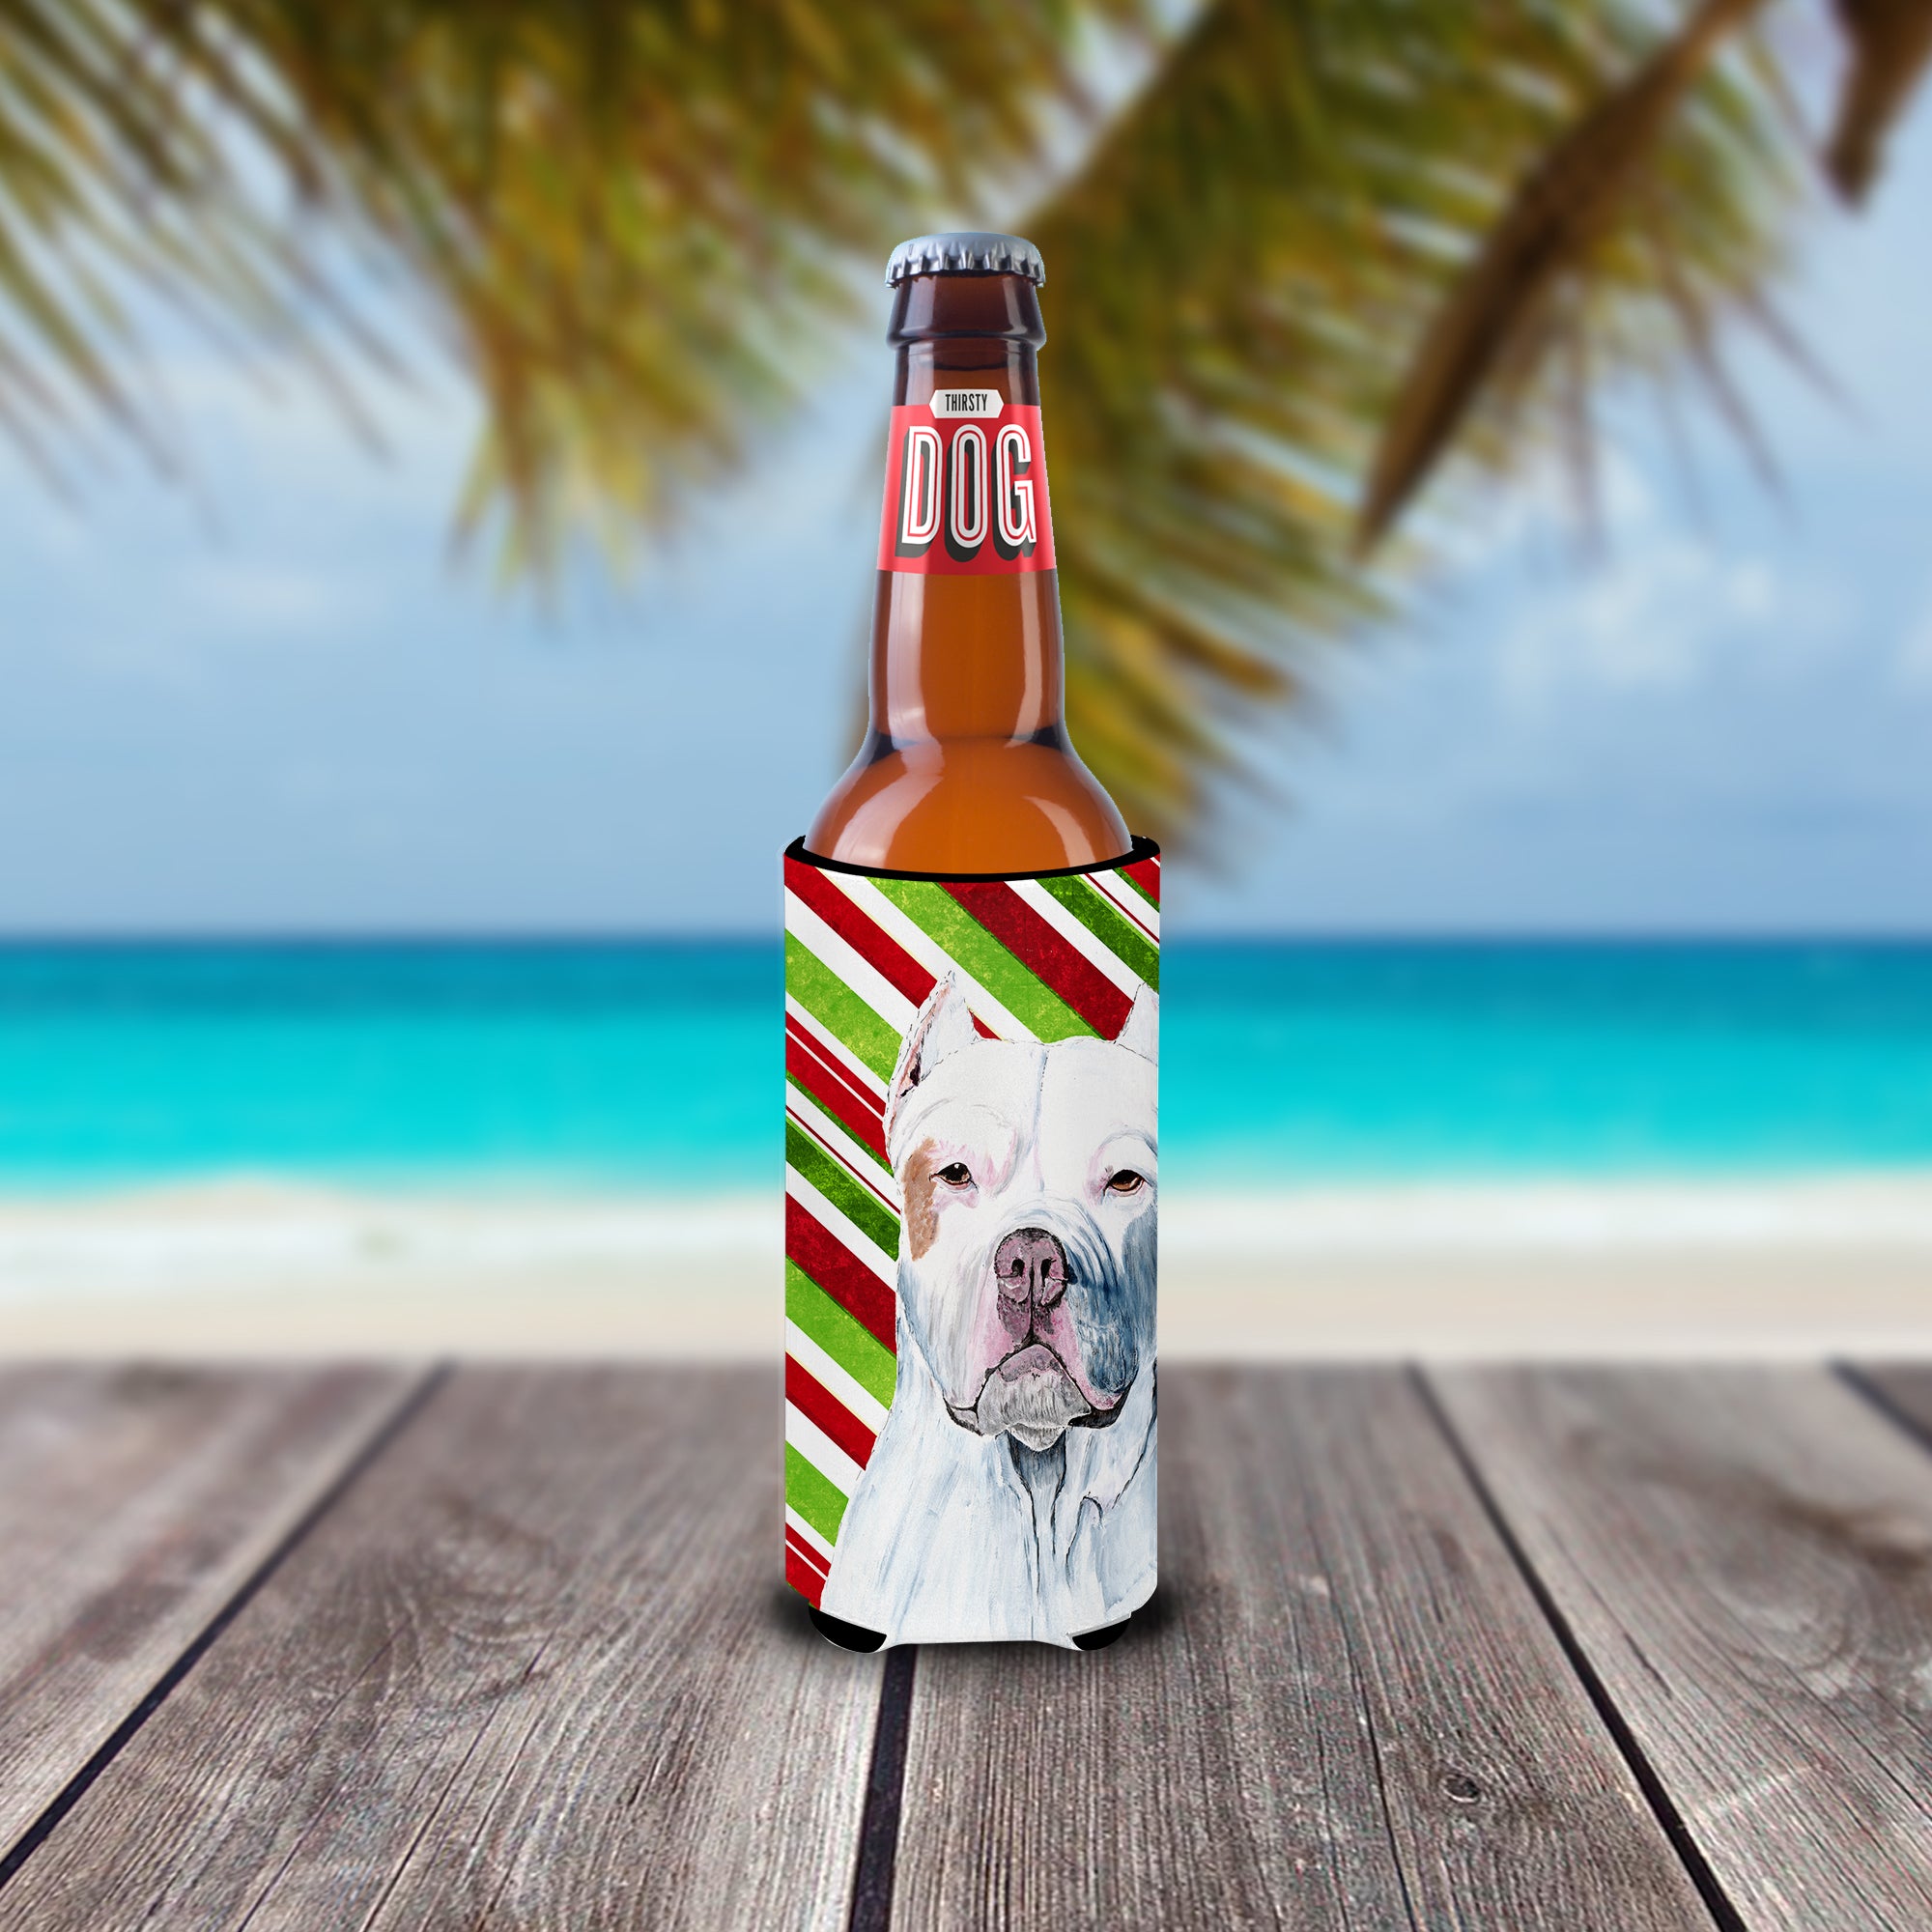 Pit Bull Candy Cane Holiday Christmas Ultra Beverage Insulators for slim cans SC9341MUK.